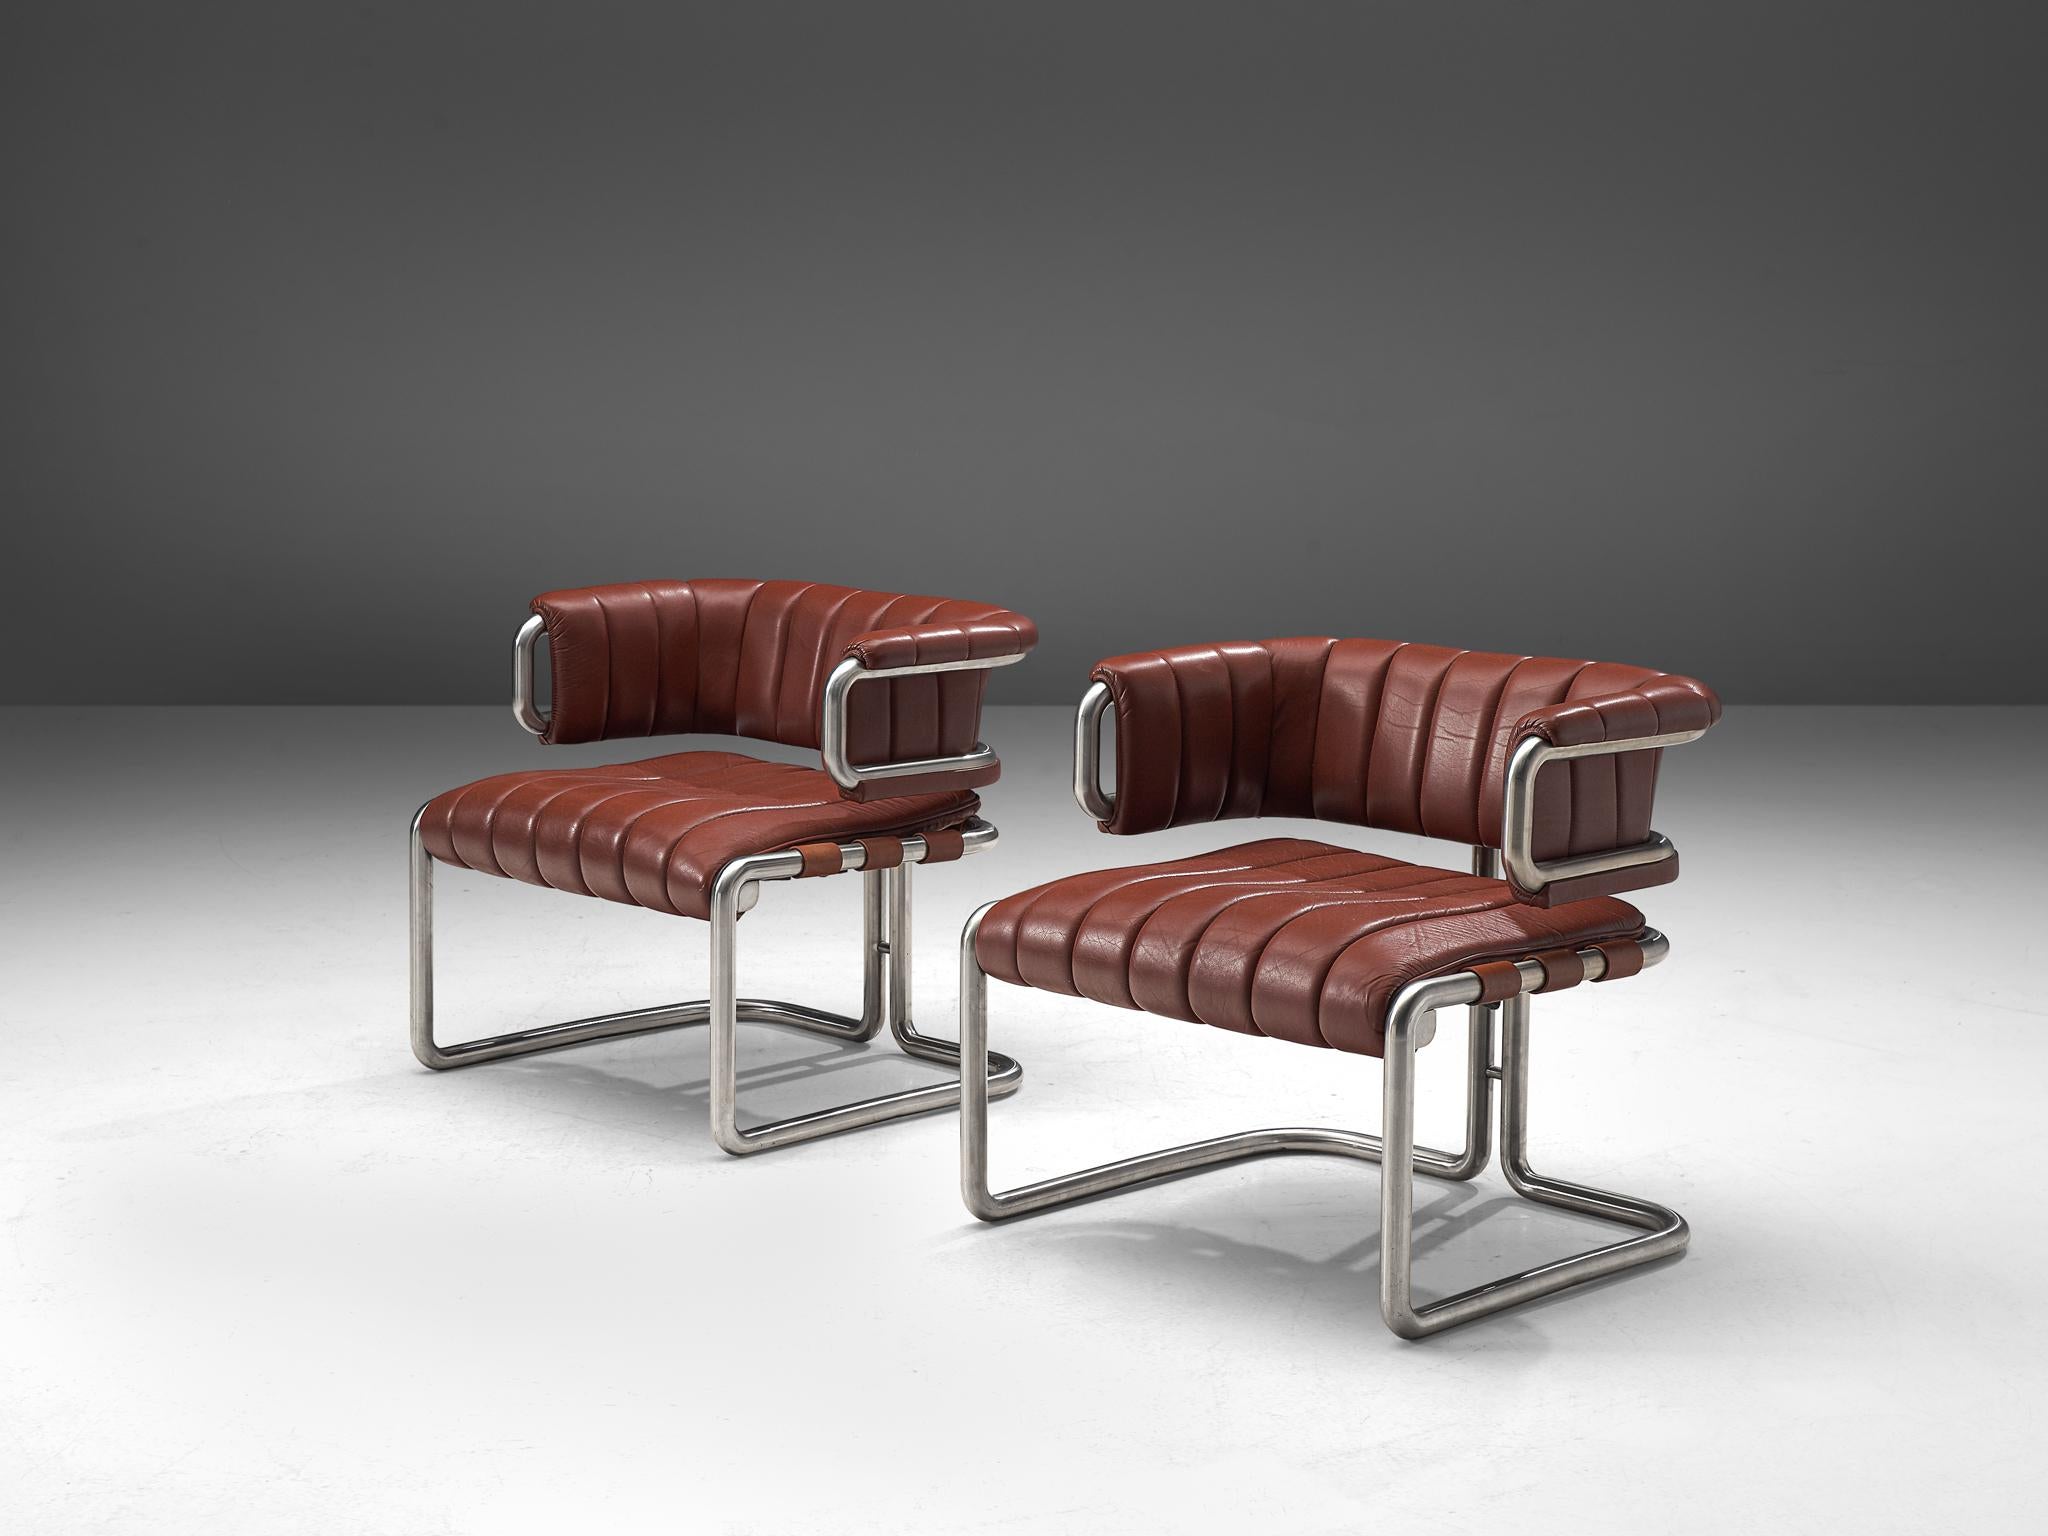 German Set of Three Cubist Tubular Lounge Chairs in Red Leather